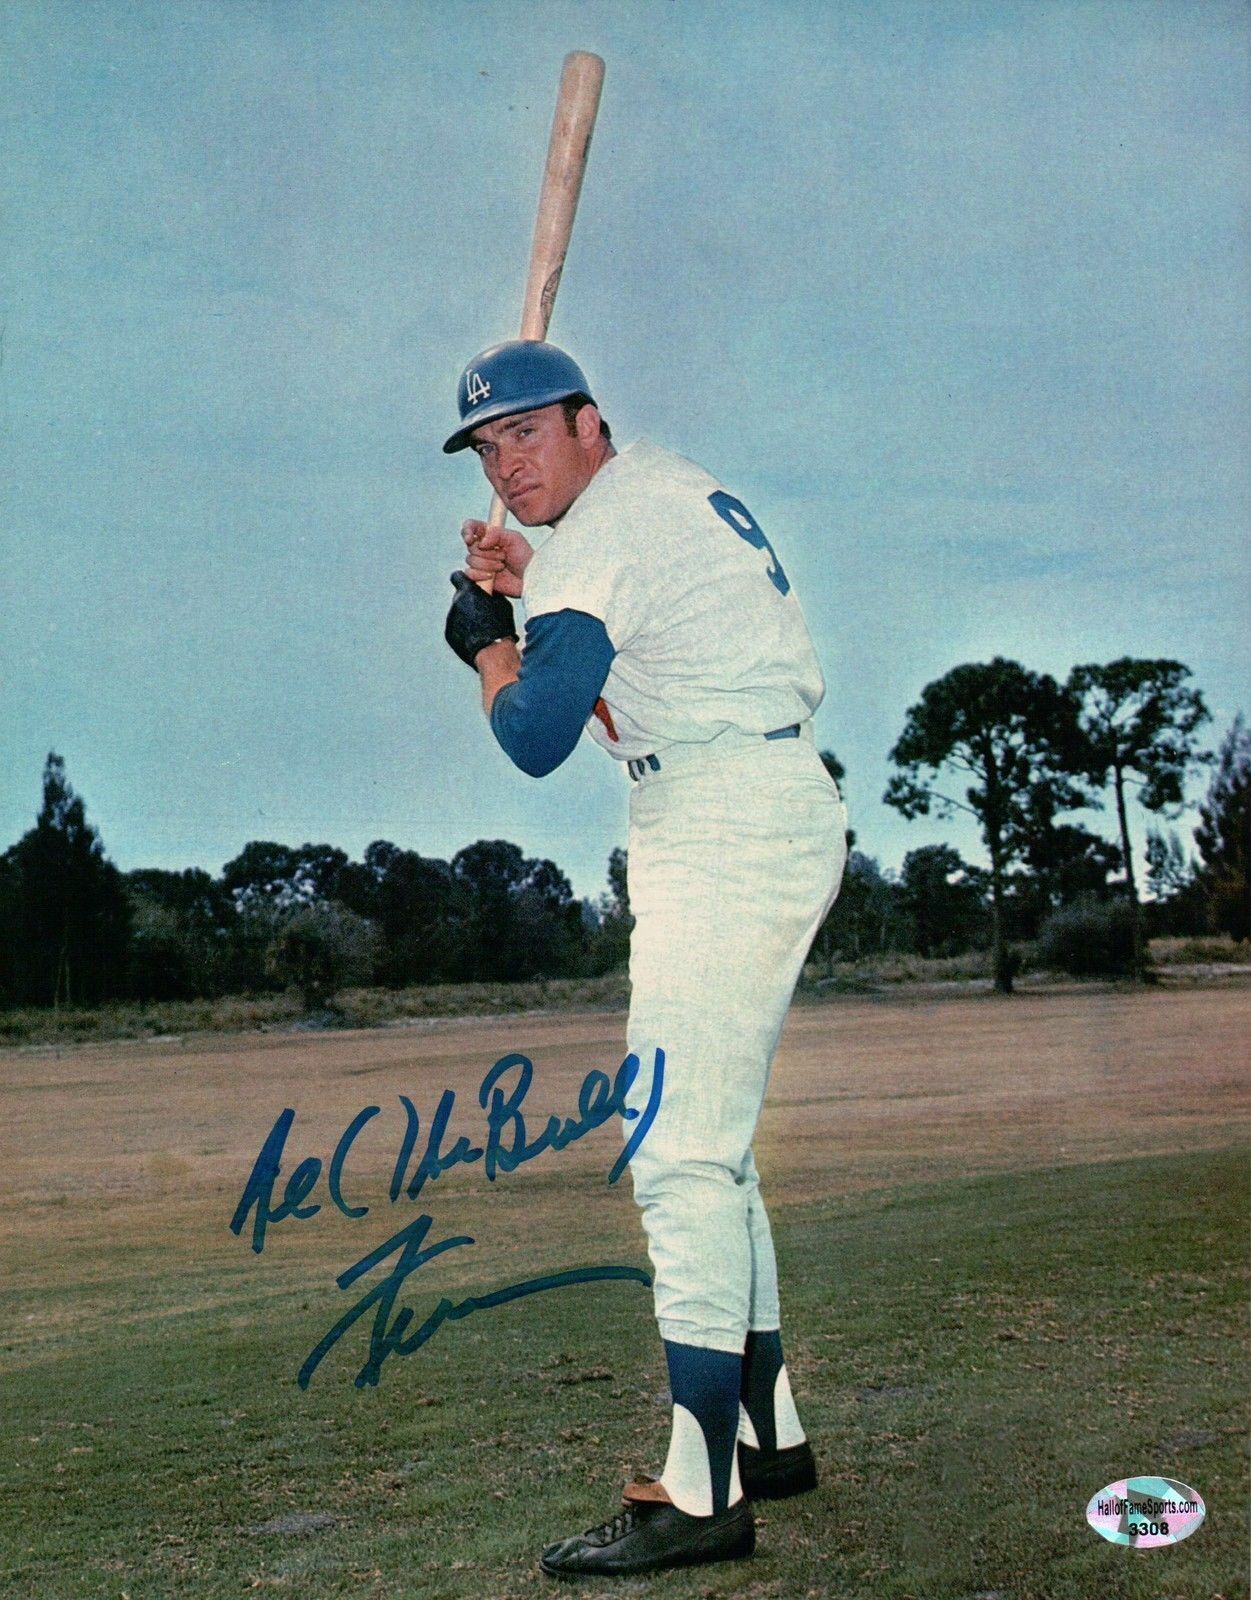 Al (The Bull) Ferrara Signed 8X10 Photo Poster painting Autograph Dodgers Field Two Line Left